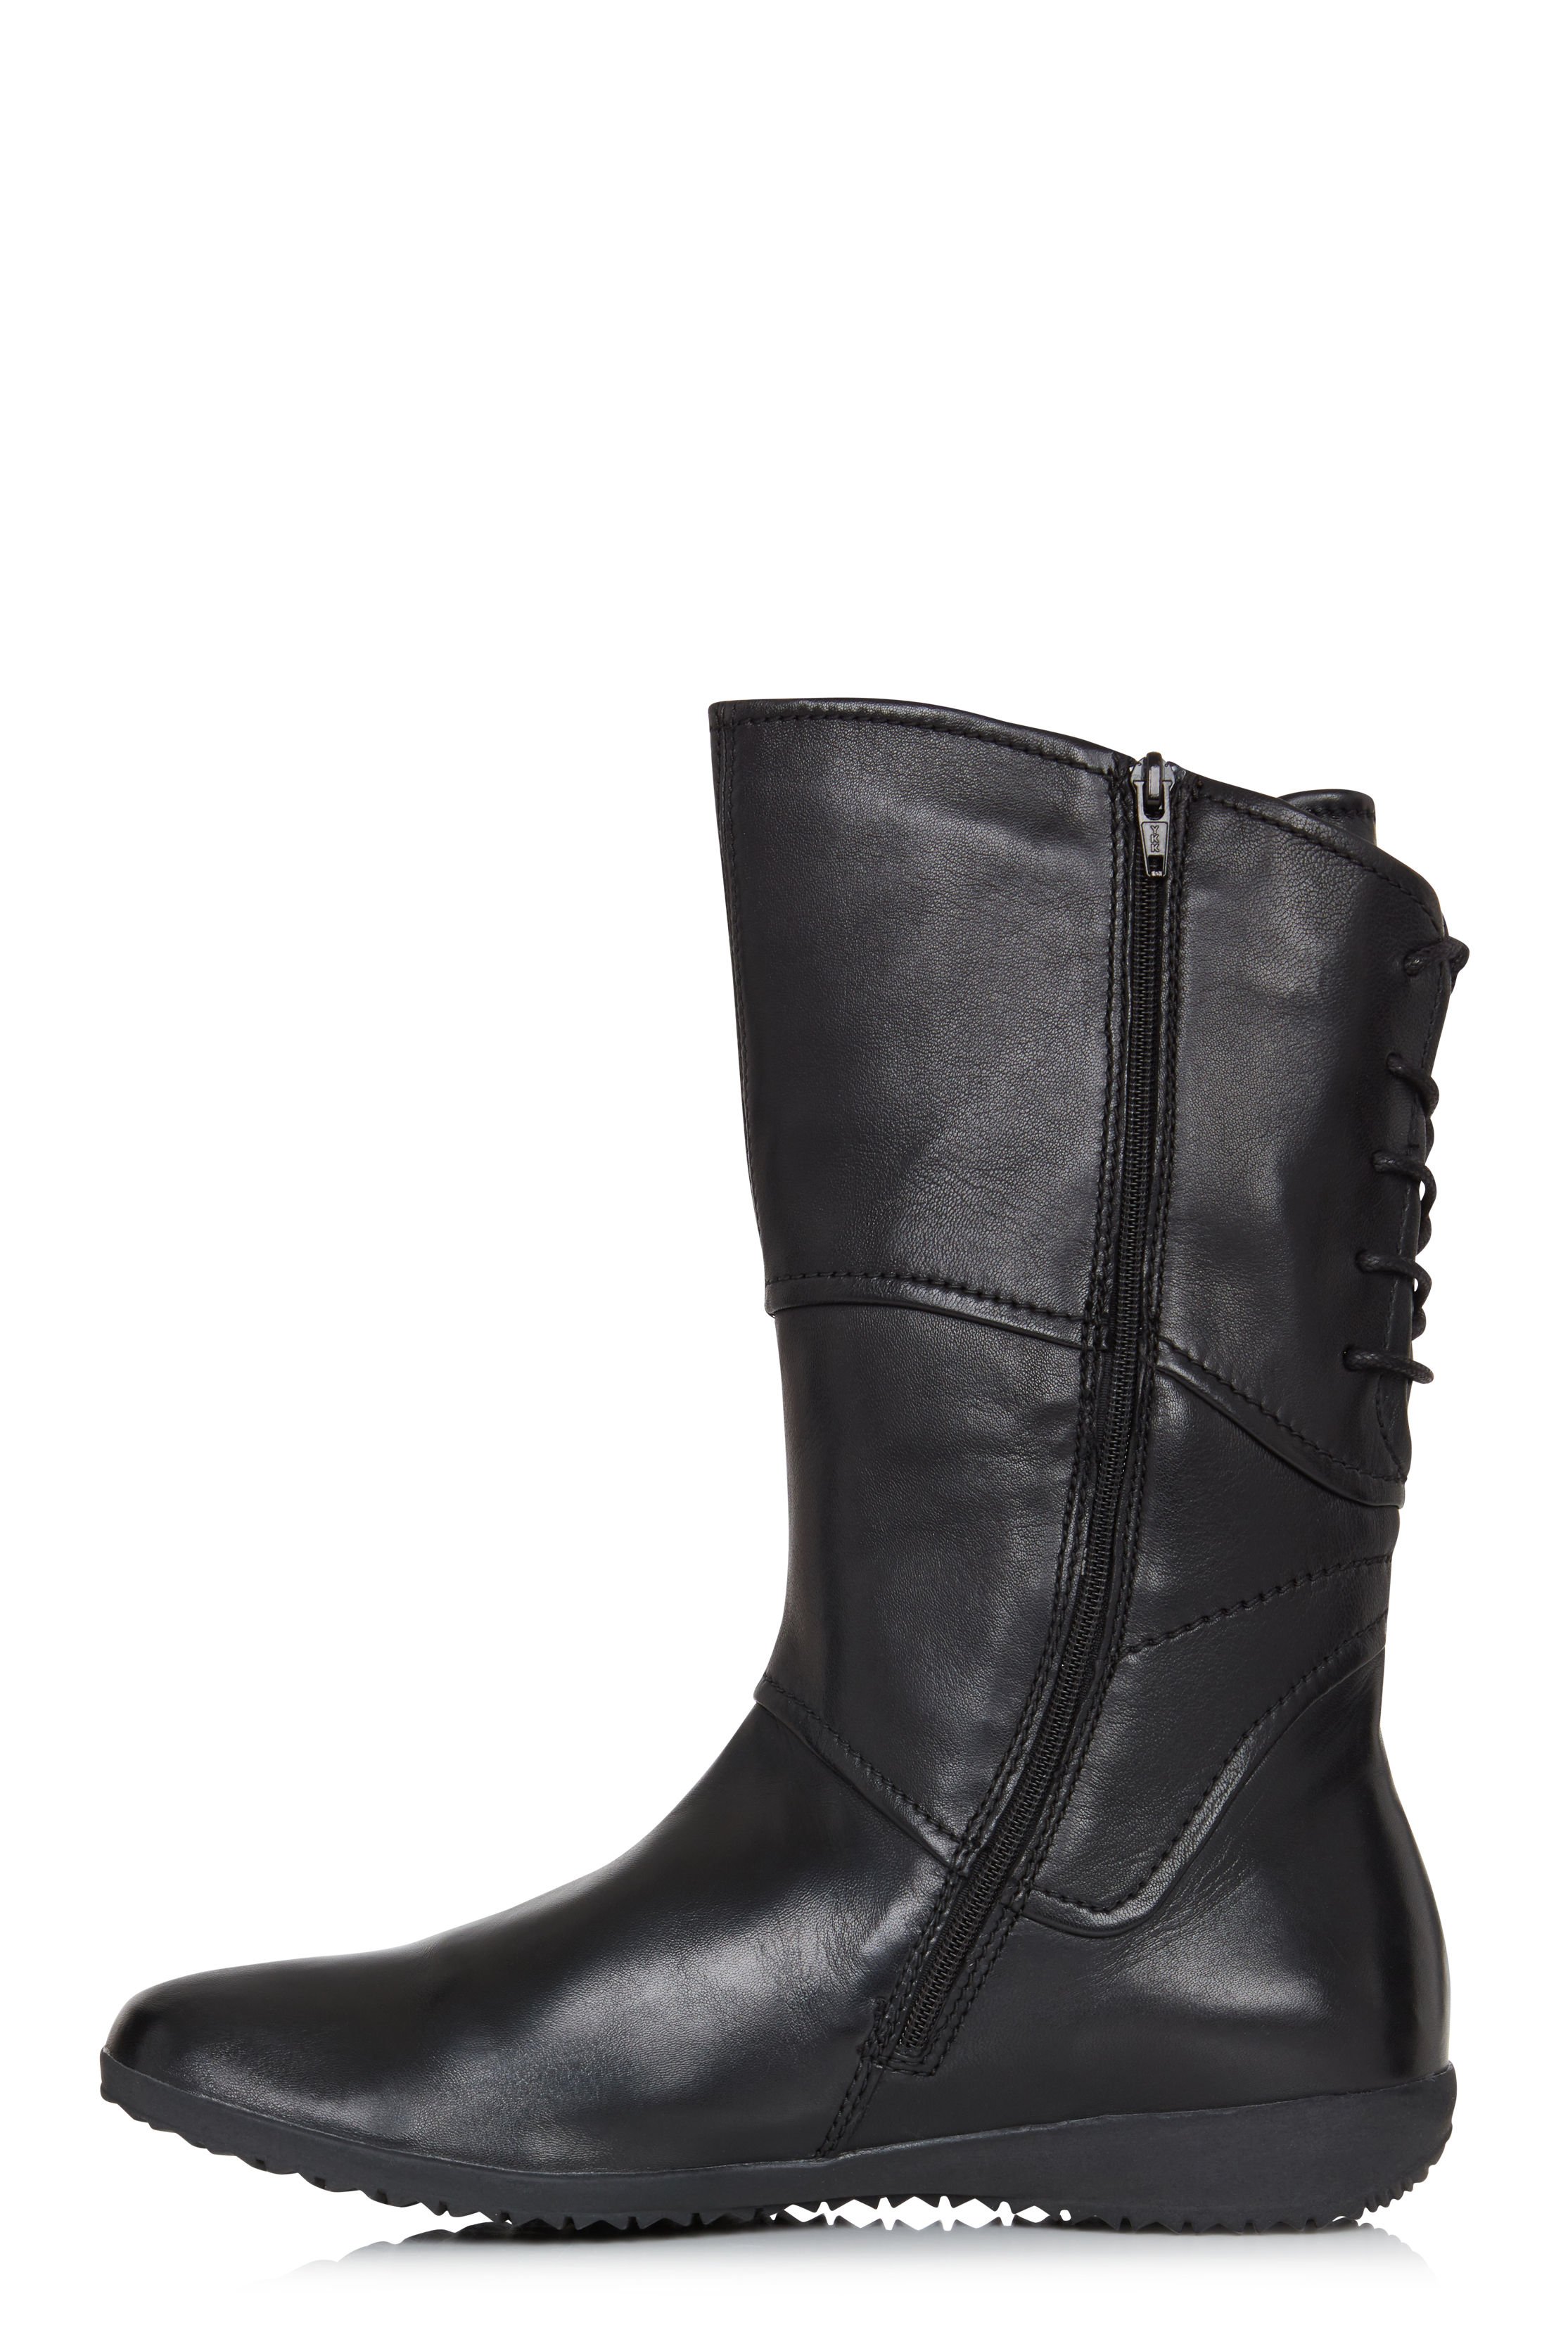 Josef Seibel Naly 07 Leather Lace Up Calf Boot | Long Tall Sally